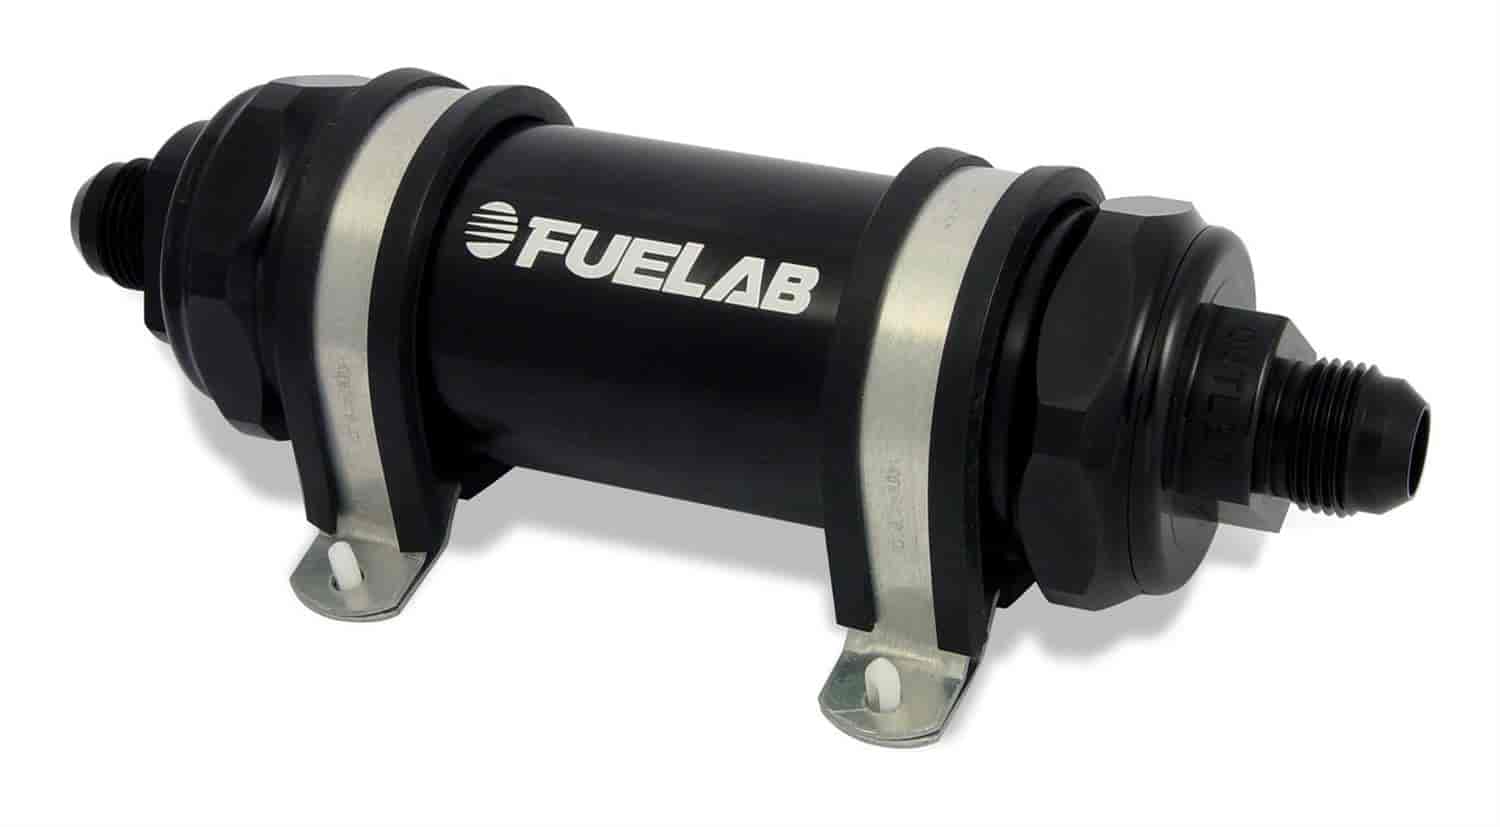 In-Line Fuel Filter Long Length -8AN Inlet/-6AN Outlet 75 micron stainless steel element